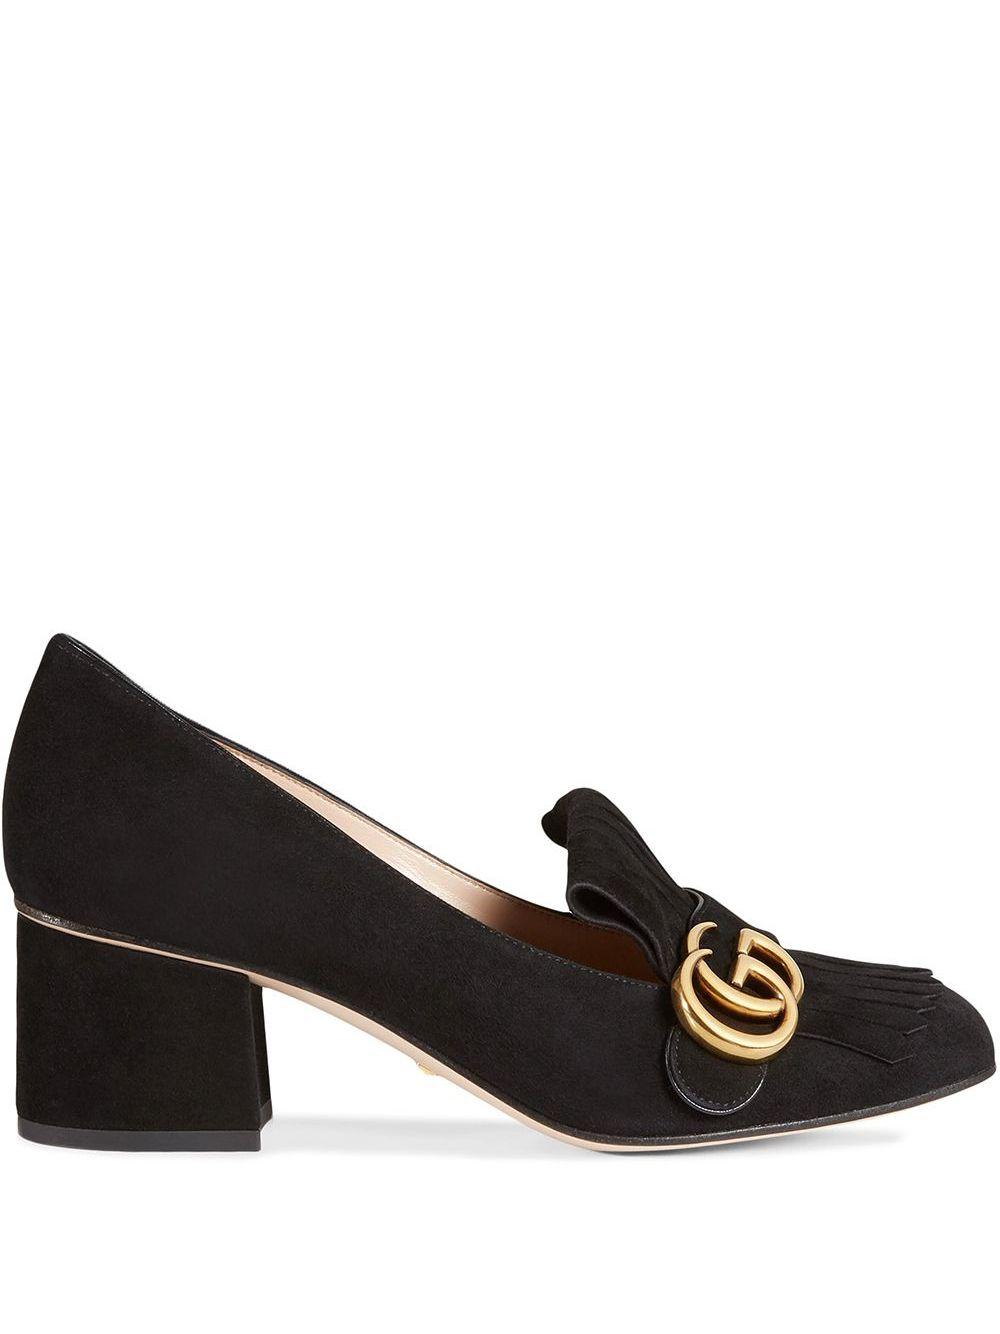 Gucci Leather Mid-Heel Marmont Pump in Black | Lyst